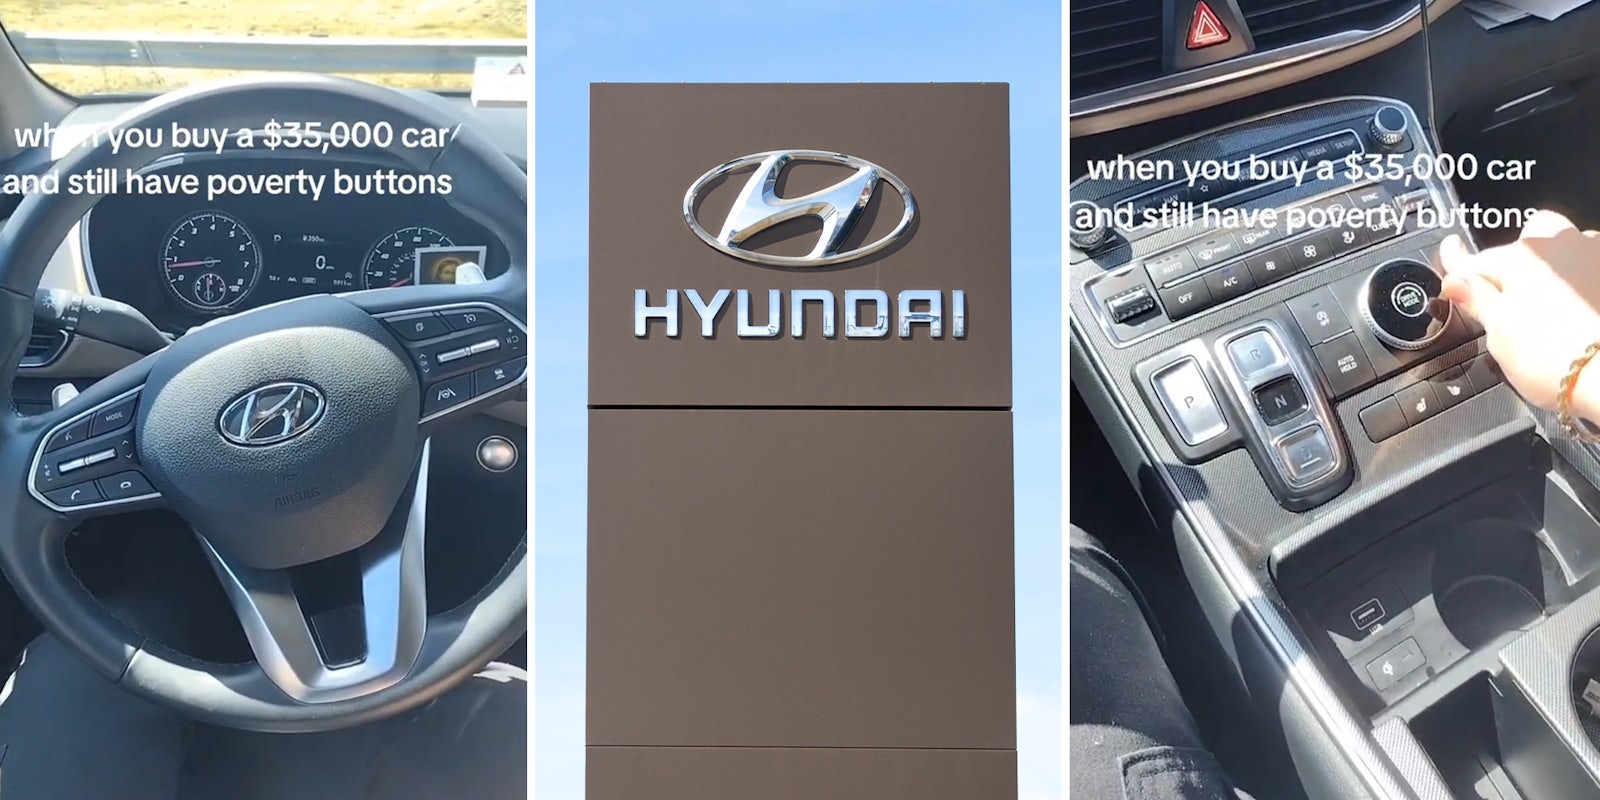 Hyundai driver says his $35,000 car still has 'poverty buttons'